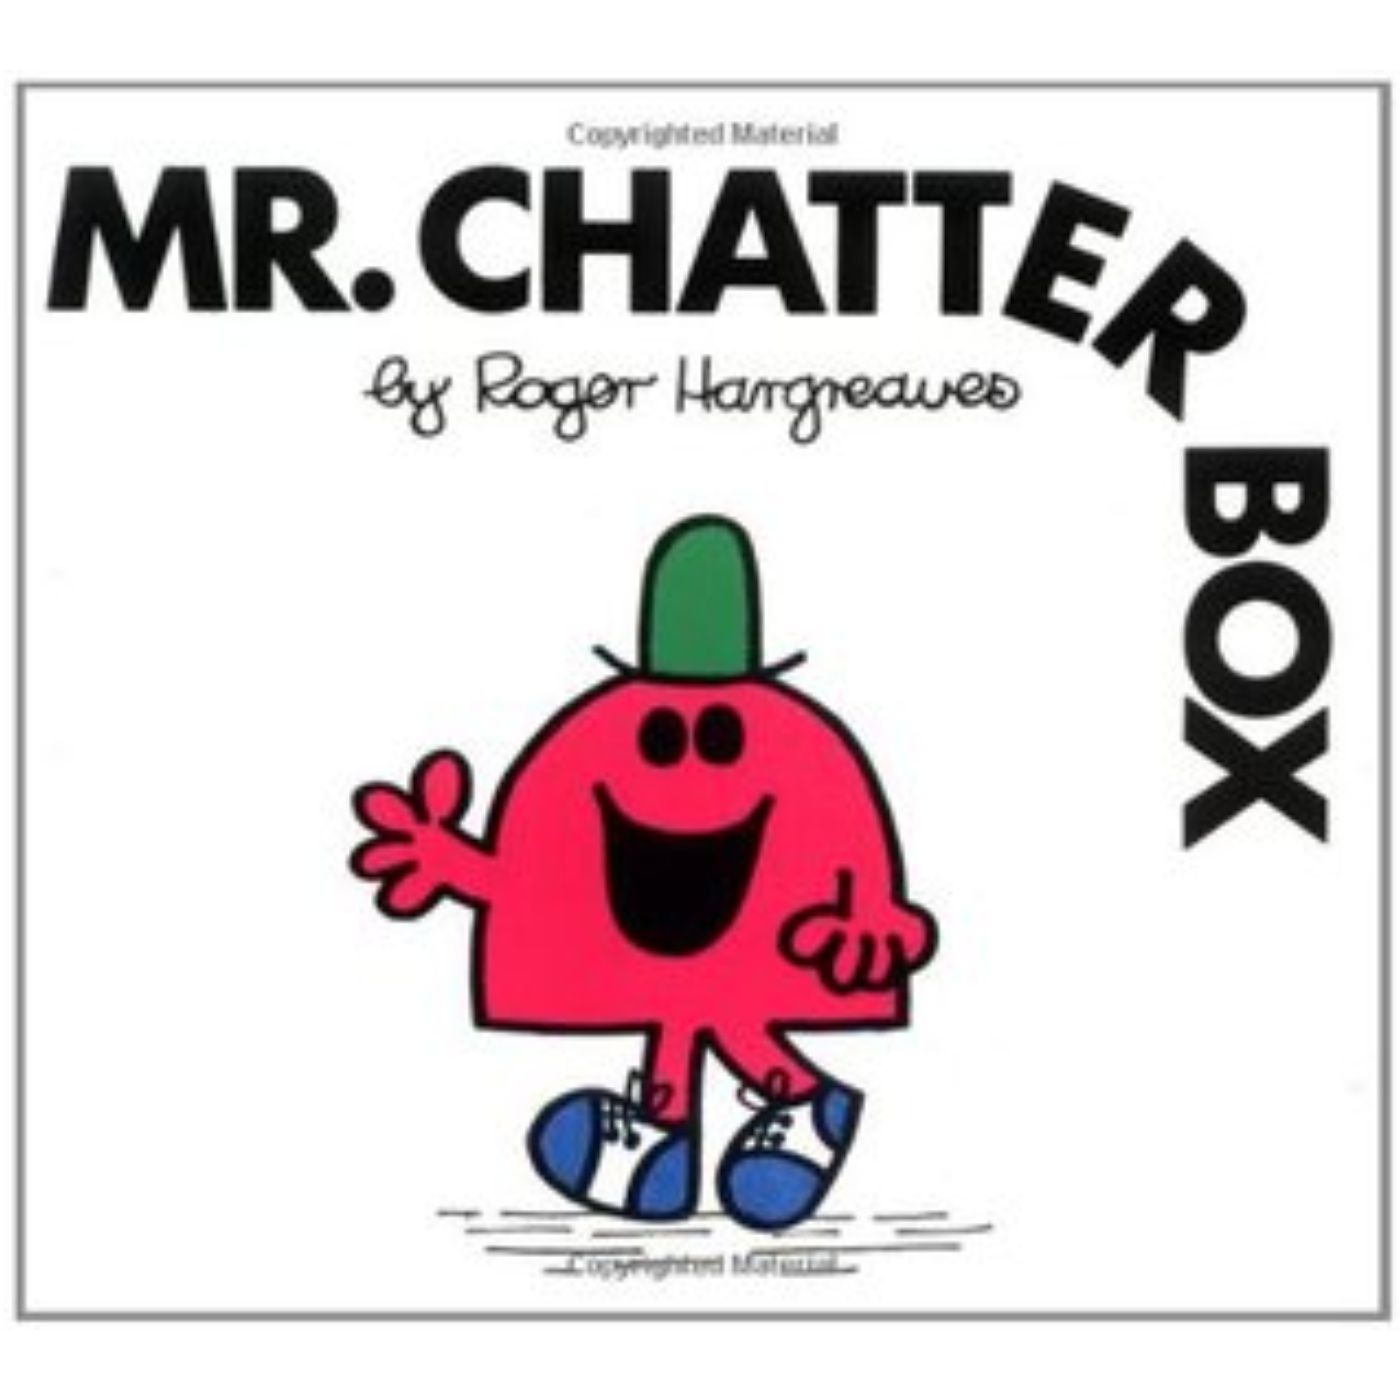 Mr. Chatterbox by Roger Hargreaves 20 of 24 Tribute - Read by Martyn Kenneth